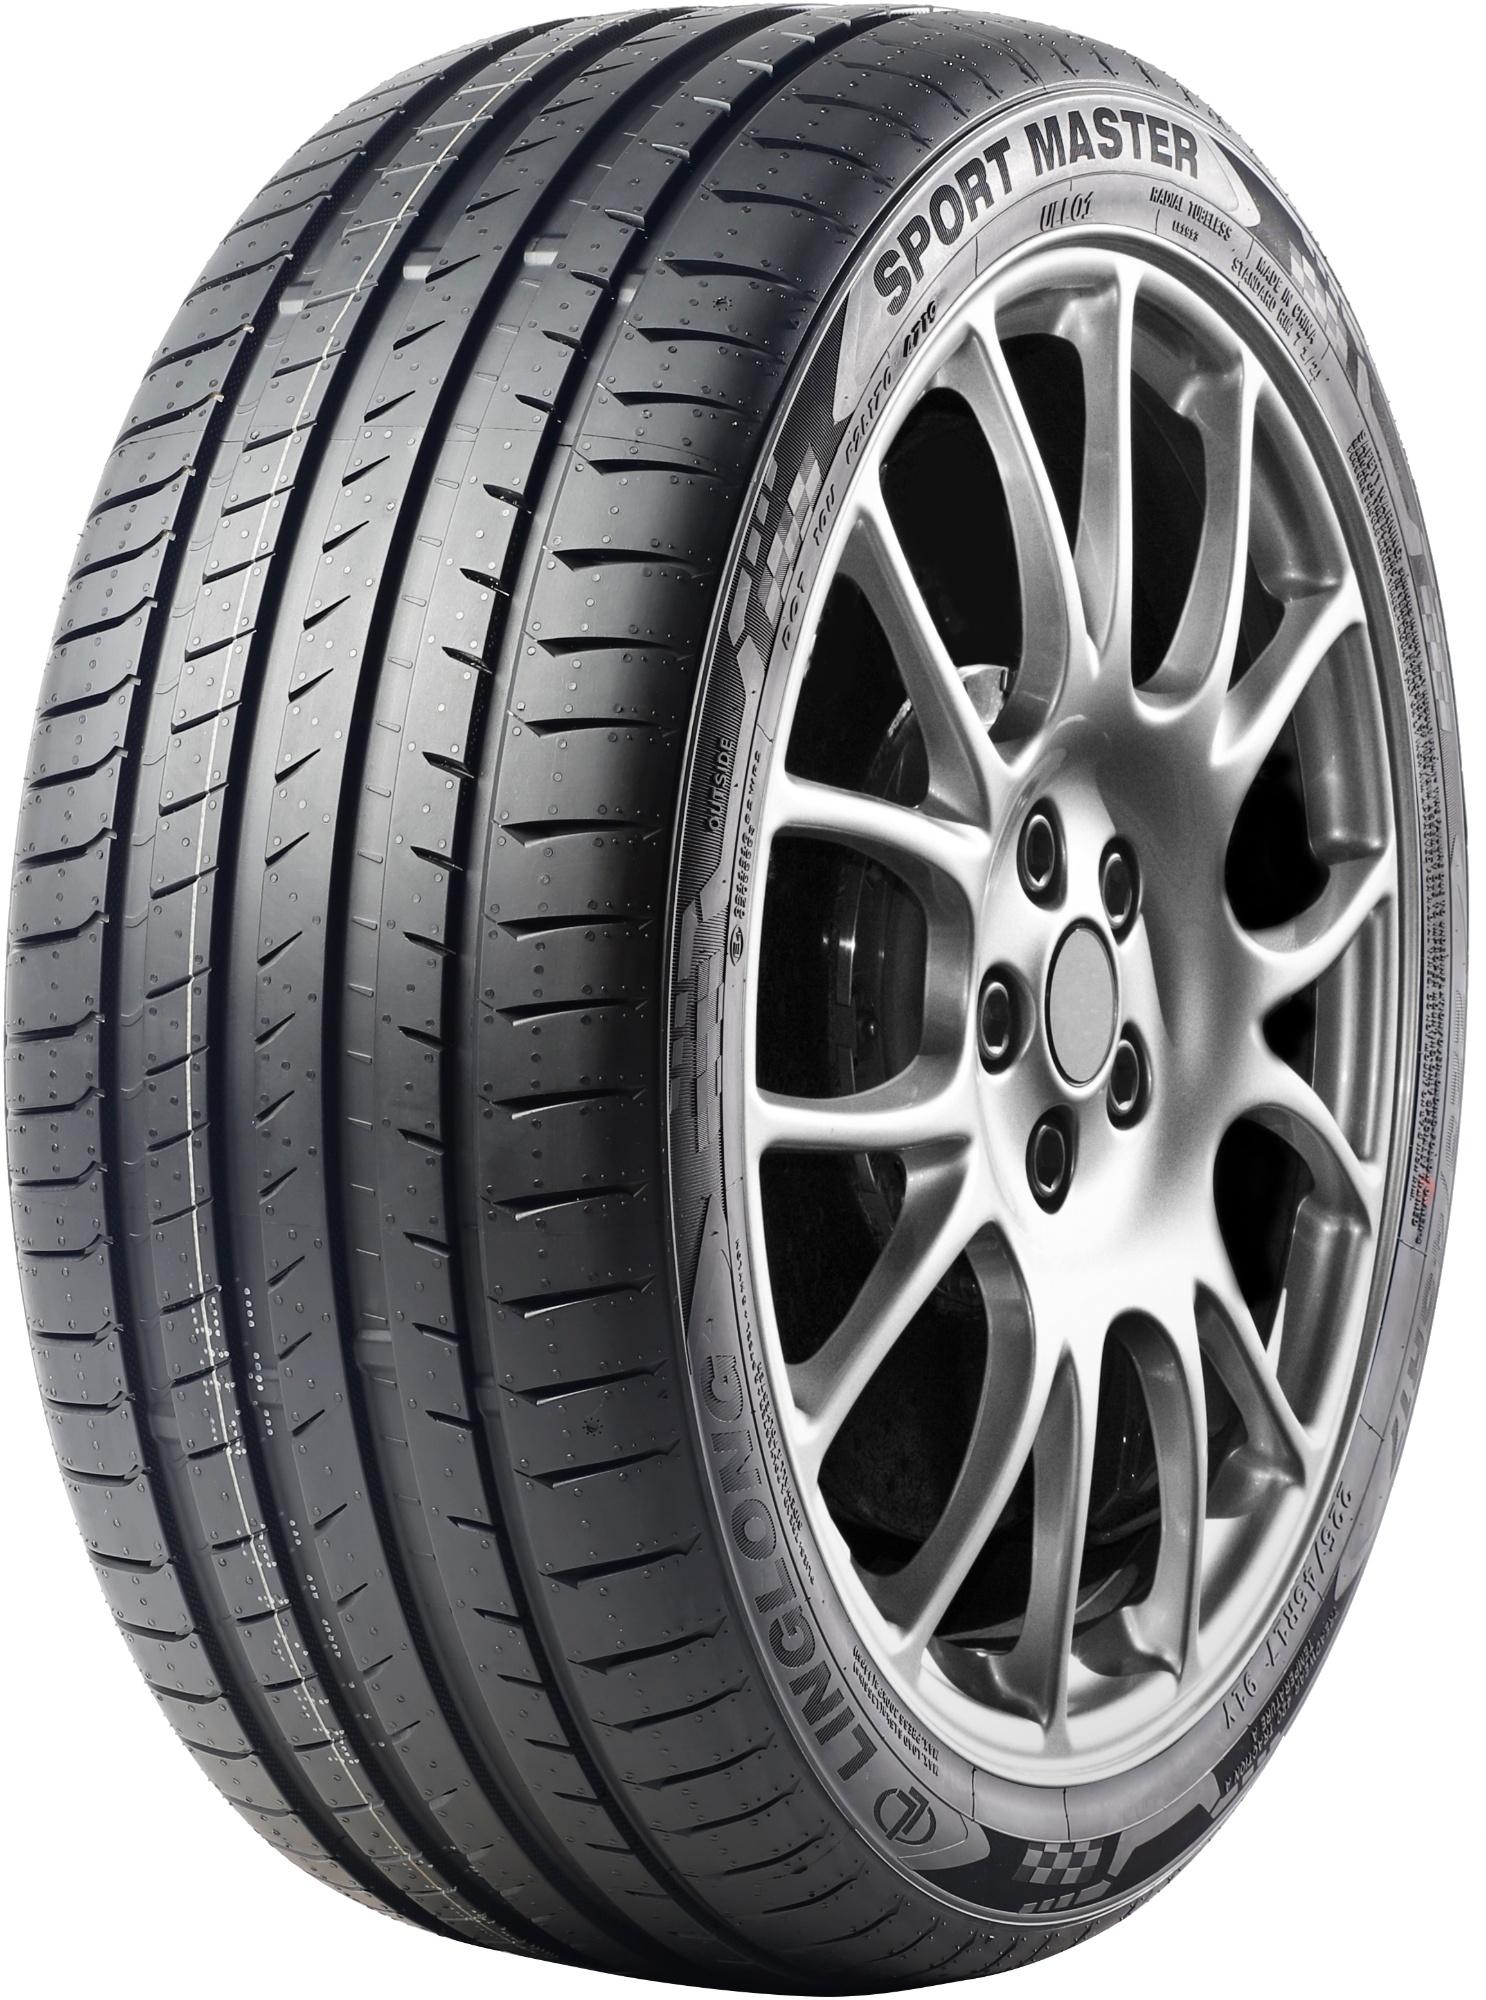 Linglong sport master uhp летняя. Ling long Sport Master UHP r17 215/55 98y. Шины LINGLONG Green-Max. Шины LINGLONG 225/45 r17. 205/45 R17 LINGLONG Sport Master UHP 88y.